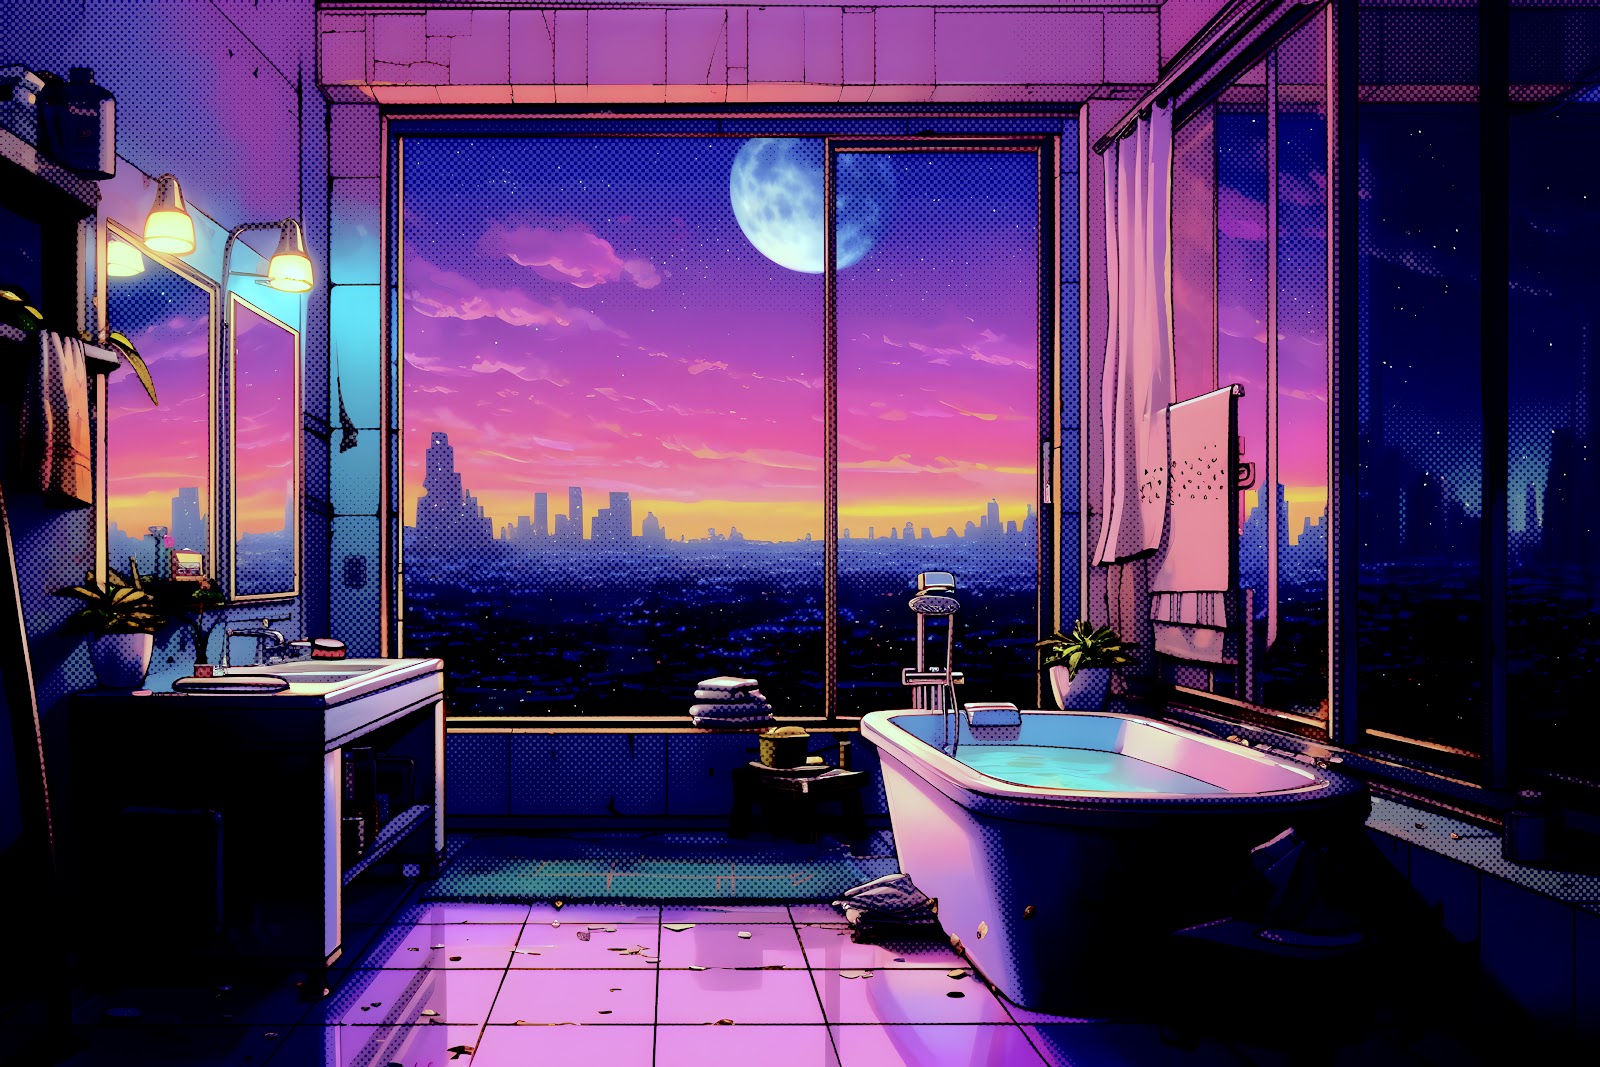 Step into Nostalgia: 90s Vaporwave Room with Chill Vibe, Lofi Background -  Free 4K Wallpaper for PC Setup in 2023